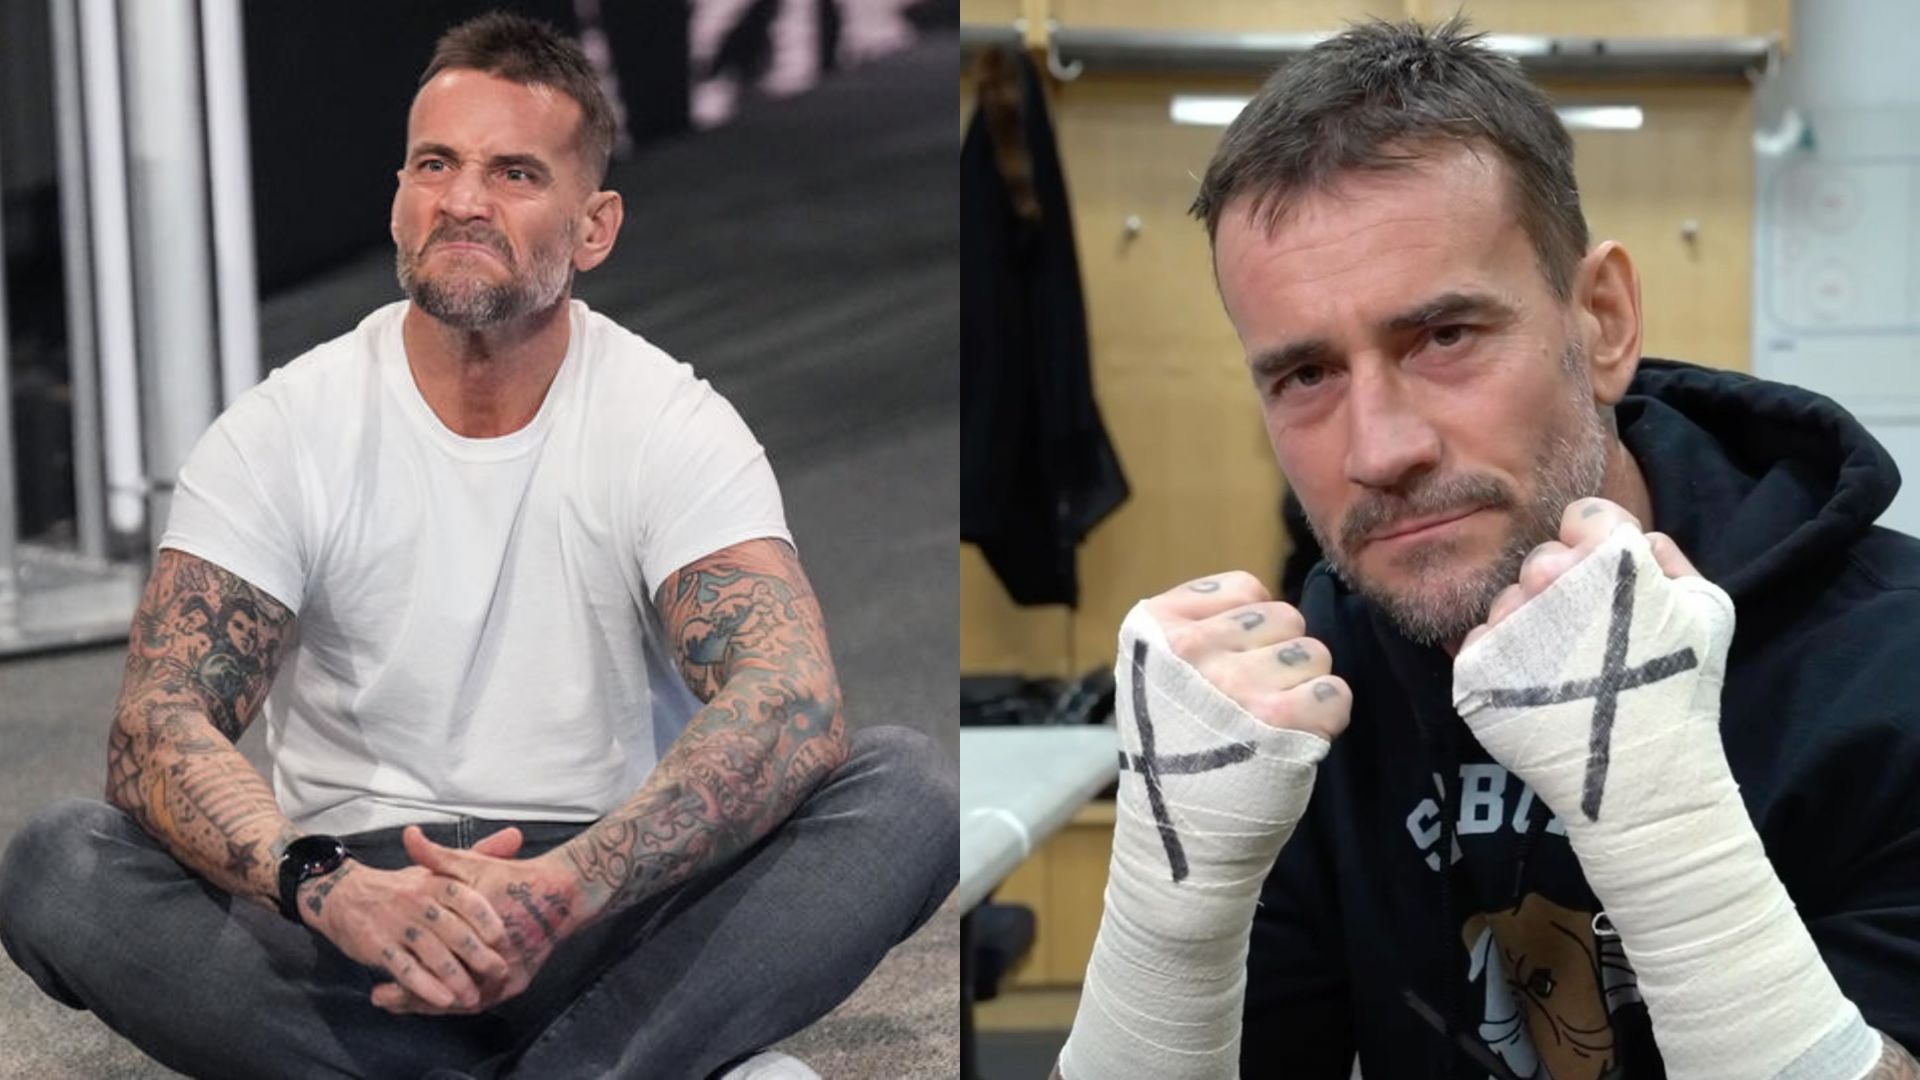 CM Punk is currently active on WWE RAW